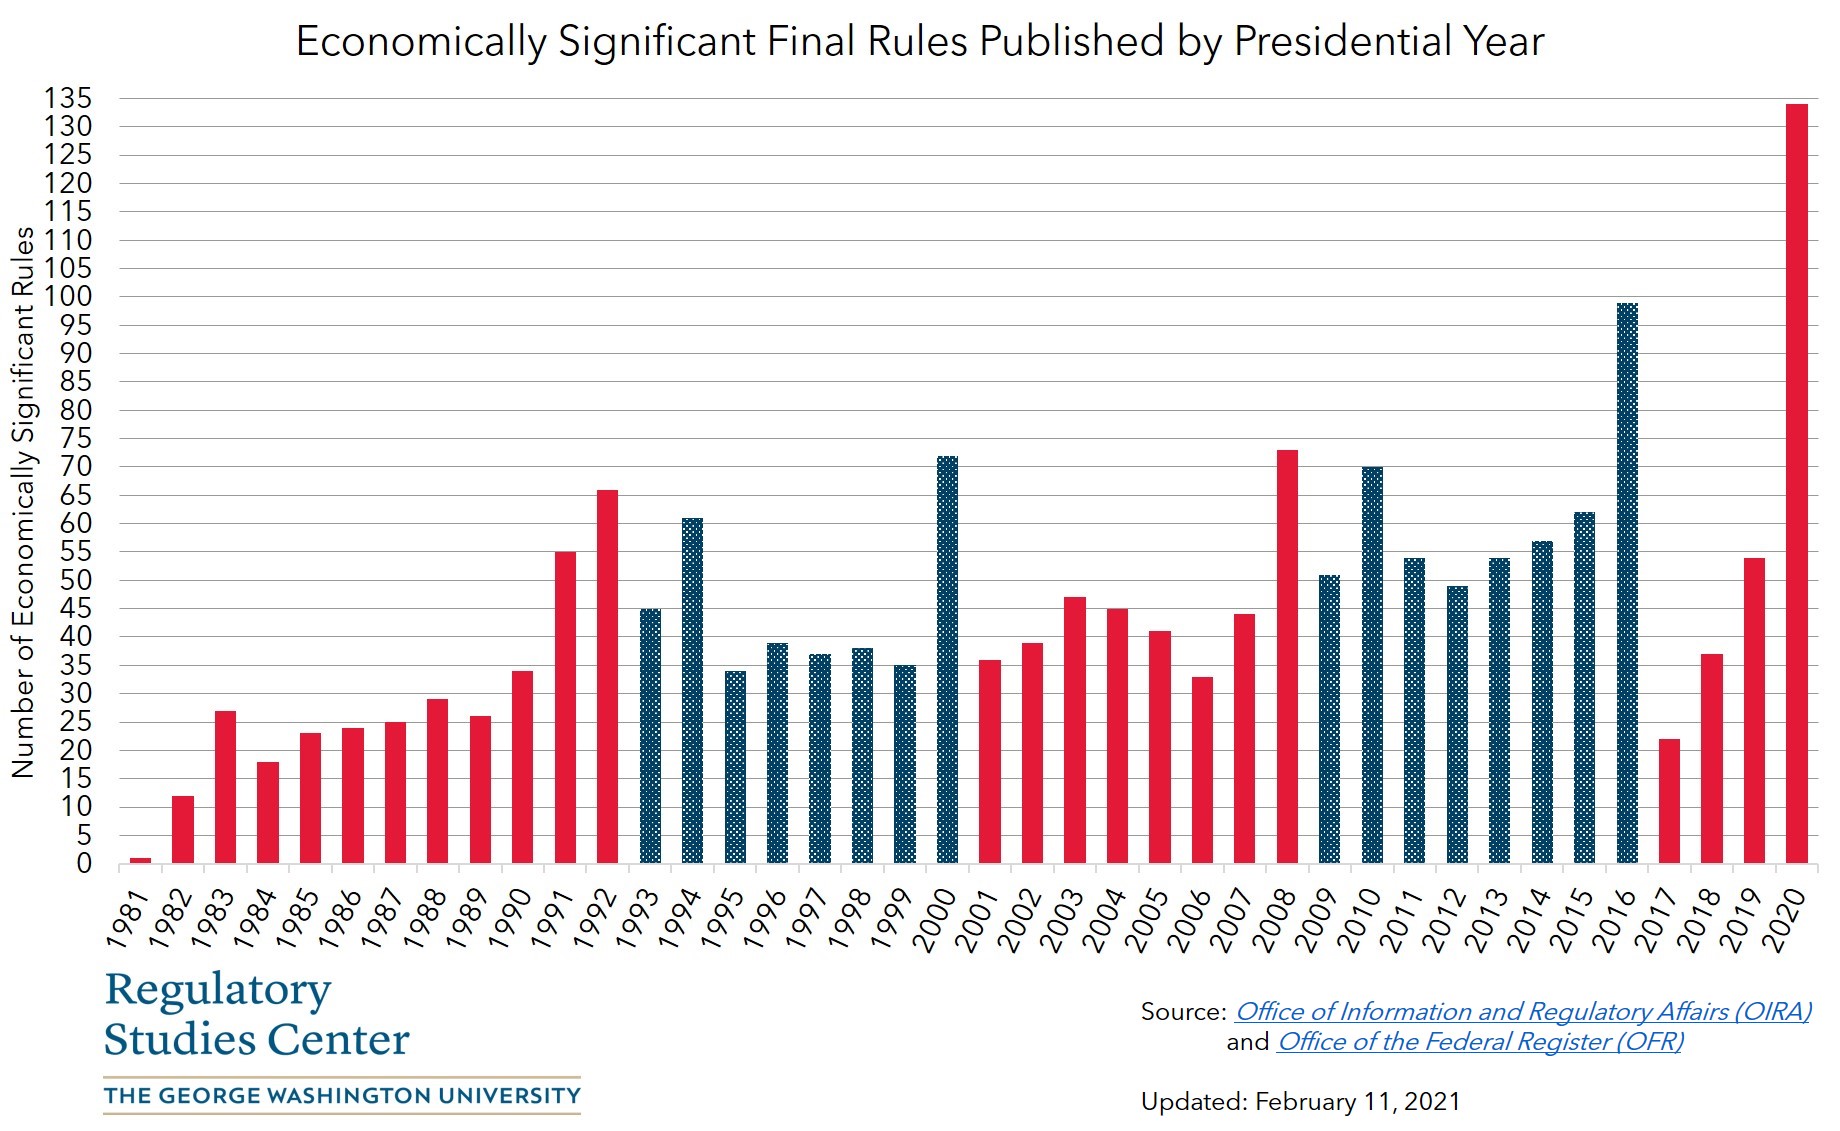 This chart shows the economically significant final rules published by presidential year from 1981 through 2017. Years 1981 through 1992, 2001 through 2008, and 2017 were under Republican administrations. Years 1993 through 2000 and years 2009 through 2016 were under Democratic administrations. The number of economically significant final rules published in the following years are as follows. 1981, 1, 1982, 12, 1983, 27, 1984, 18, 1985, 23, 1986, 24, 1987, 25, 1988, 29, 1989, 26, 1990, 34, 1991, 55, 1992, 66, 1993, 45, 1994, 61, 1995, 34, 1996, 39, 1997, 37, 1998, 38, 1999, 35, 2000, 72, 2001, 36, 2002, 39, 2003, 47, 2004, 45, 2005, 41, 2006, 33, 2007, 44, 2008, 73, 2009, 51, 2010, 70, 2011, 54, 2012, 49, 2013, 54, 2014, 57, 2015, 61, 2016, 94, 2017, 19.